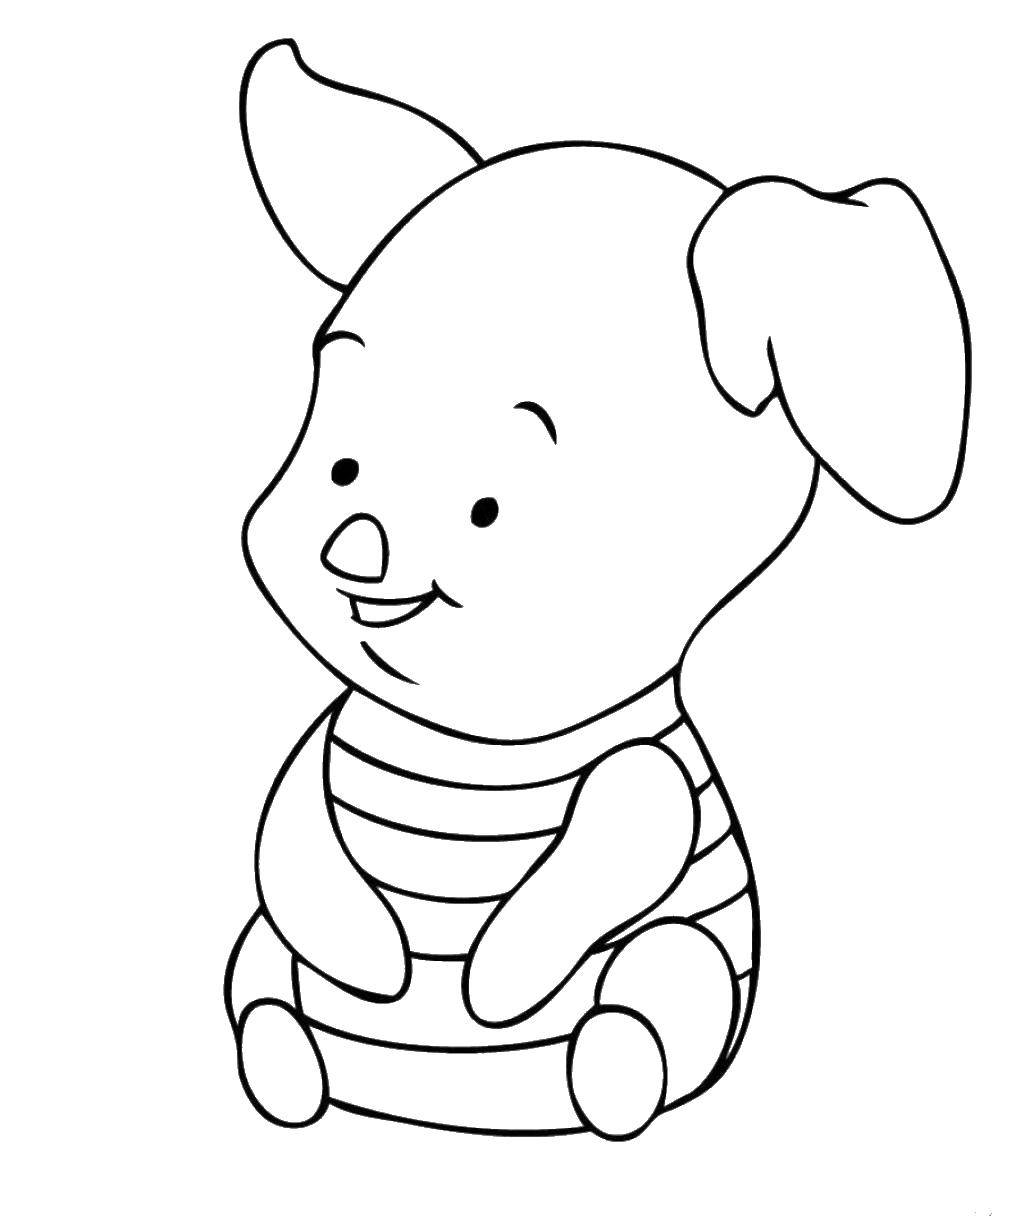 Coloring Piglet. Category cartoons. Tags:  Cartoon character, Winnie the Pooh, Piglet.